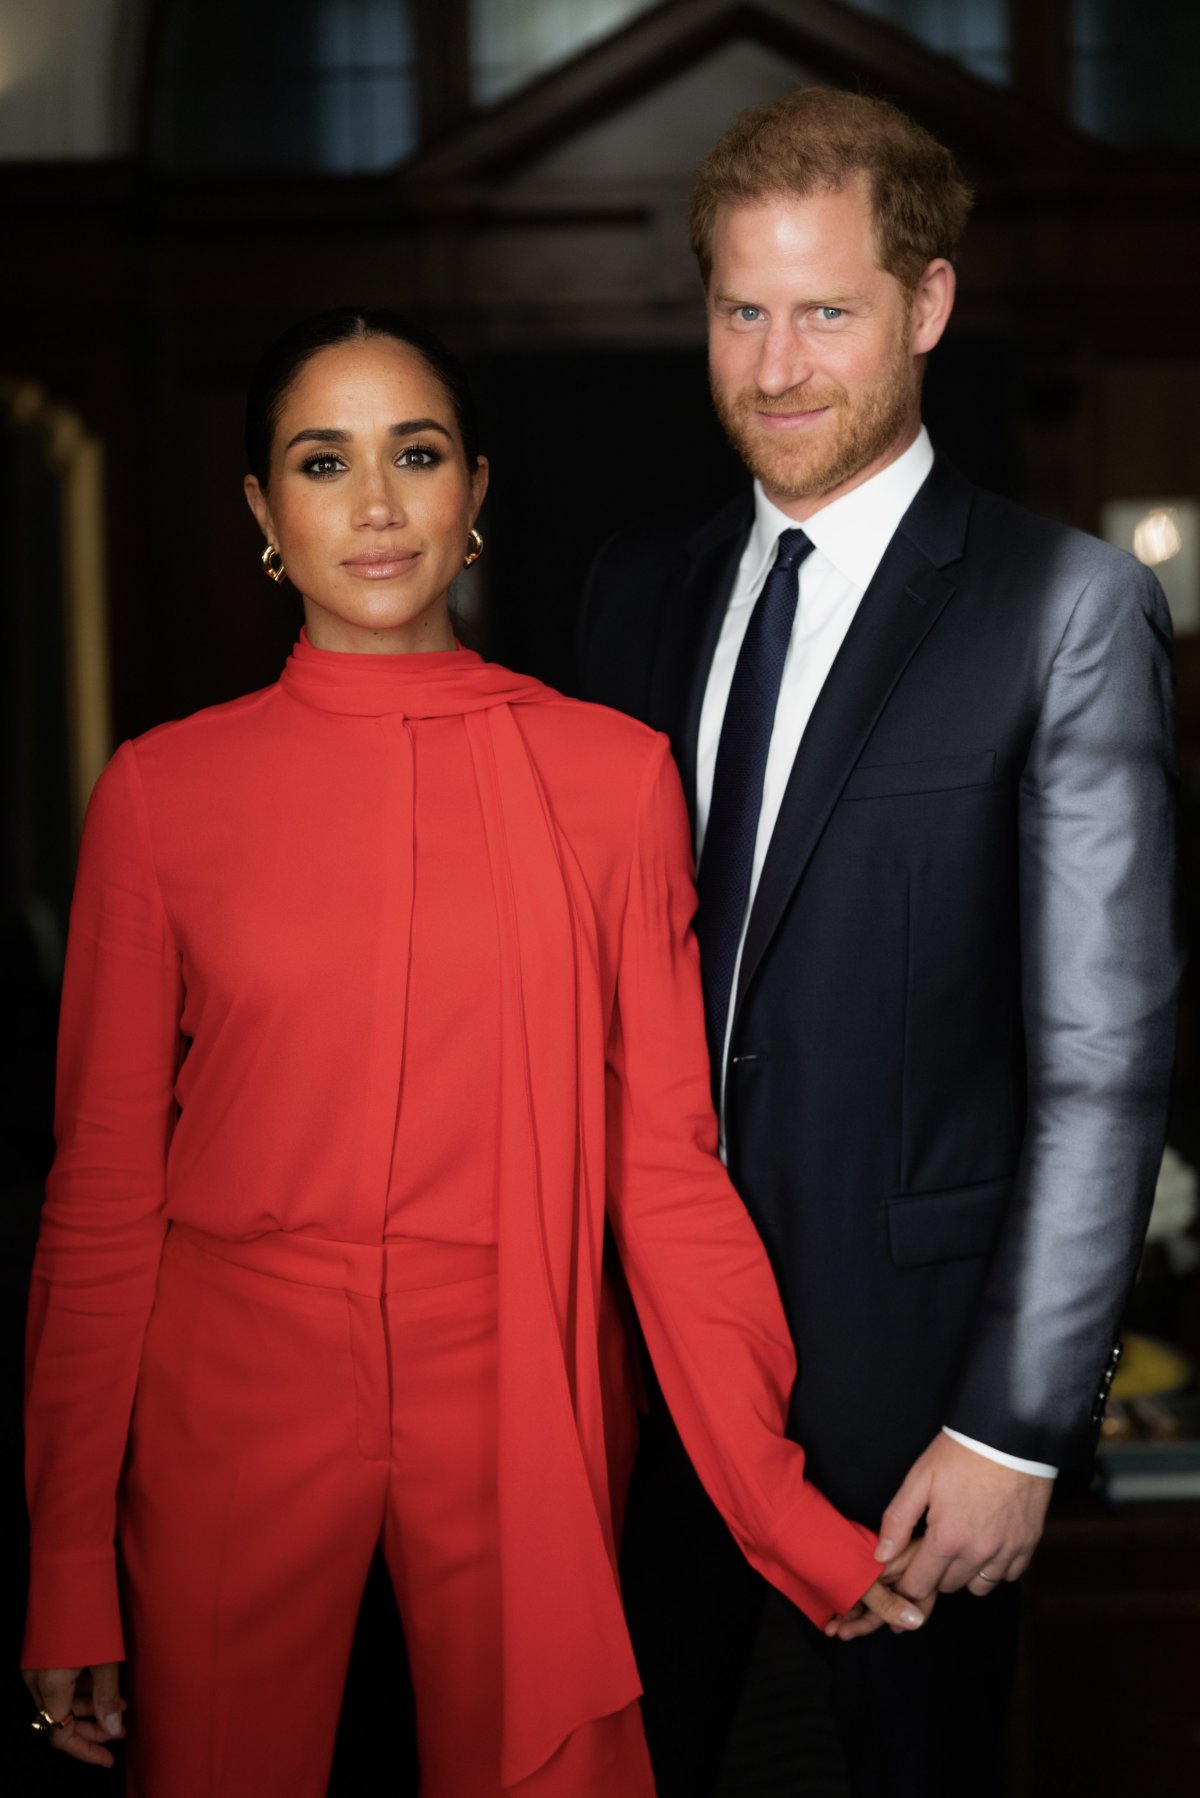 Meghan and Harry Before Youth Summit